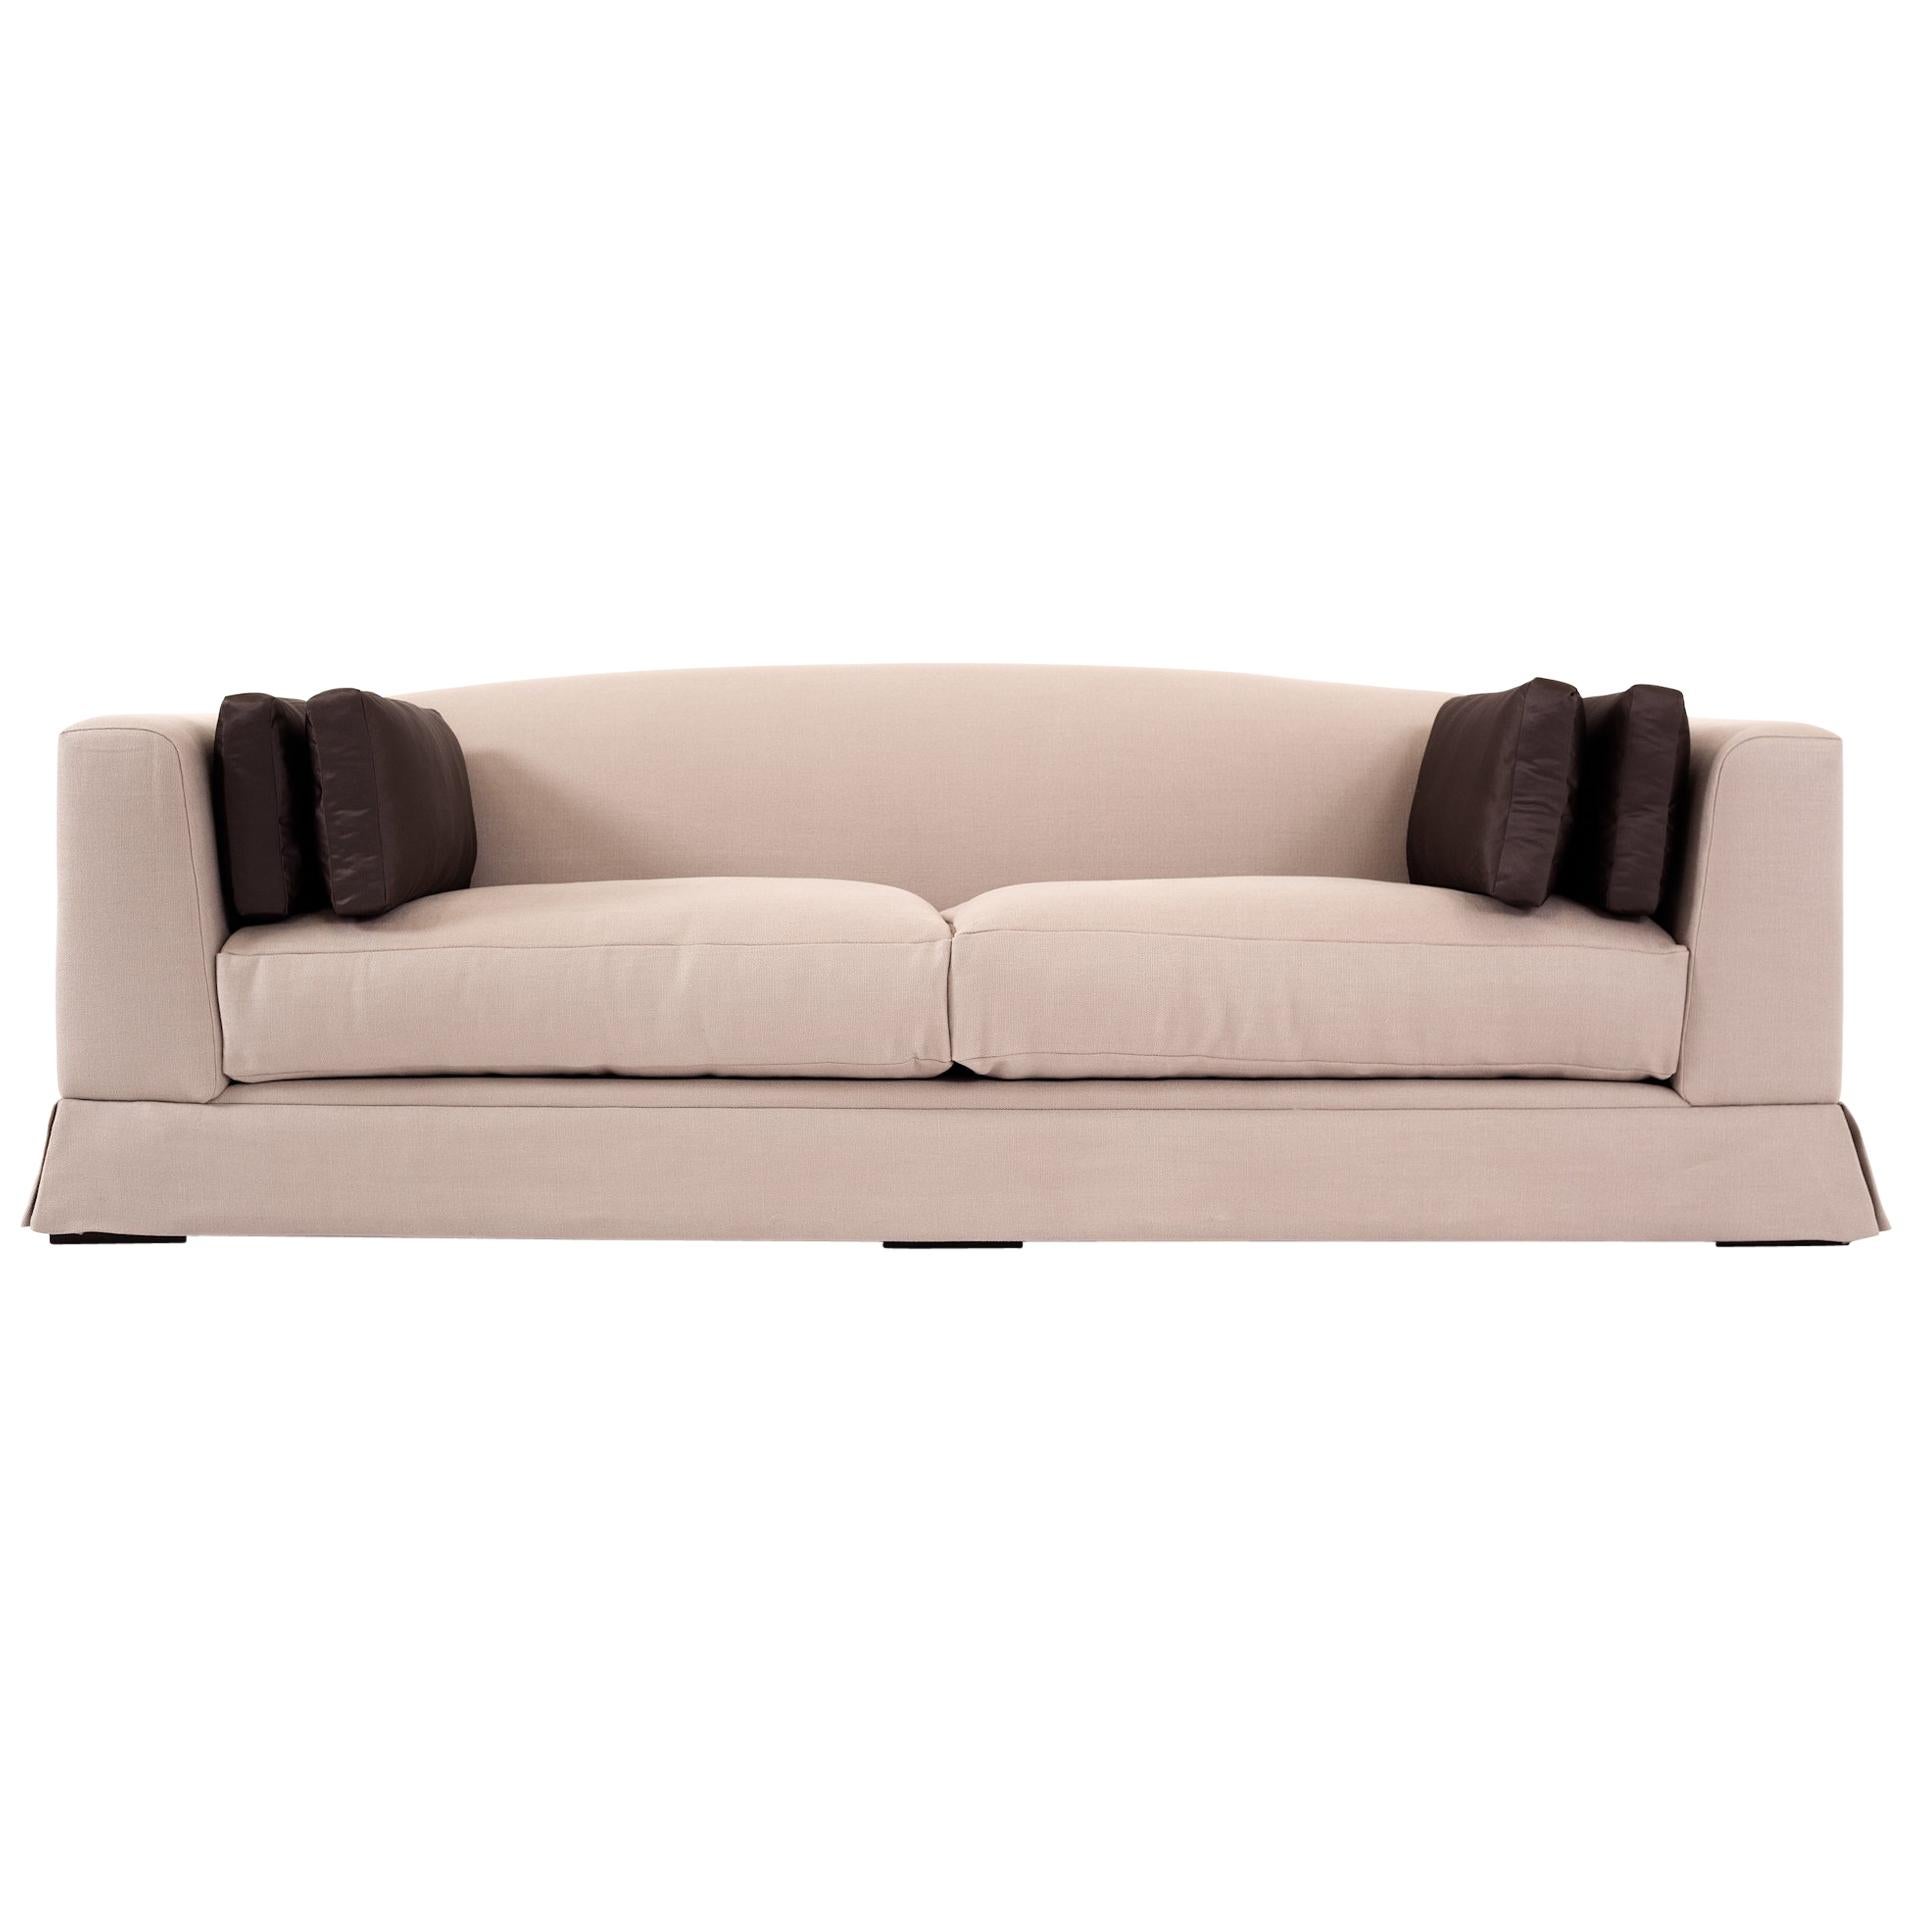 Pax Sofa For Sale